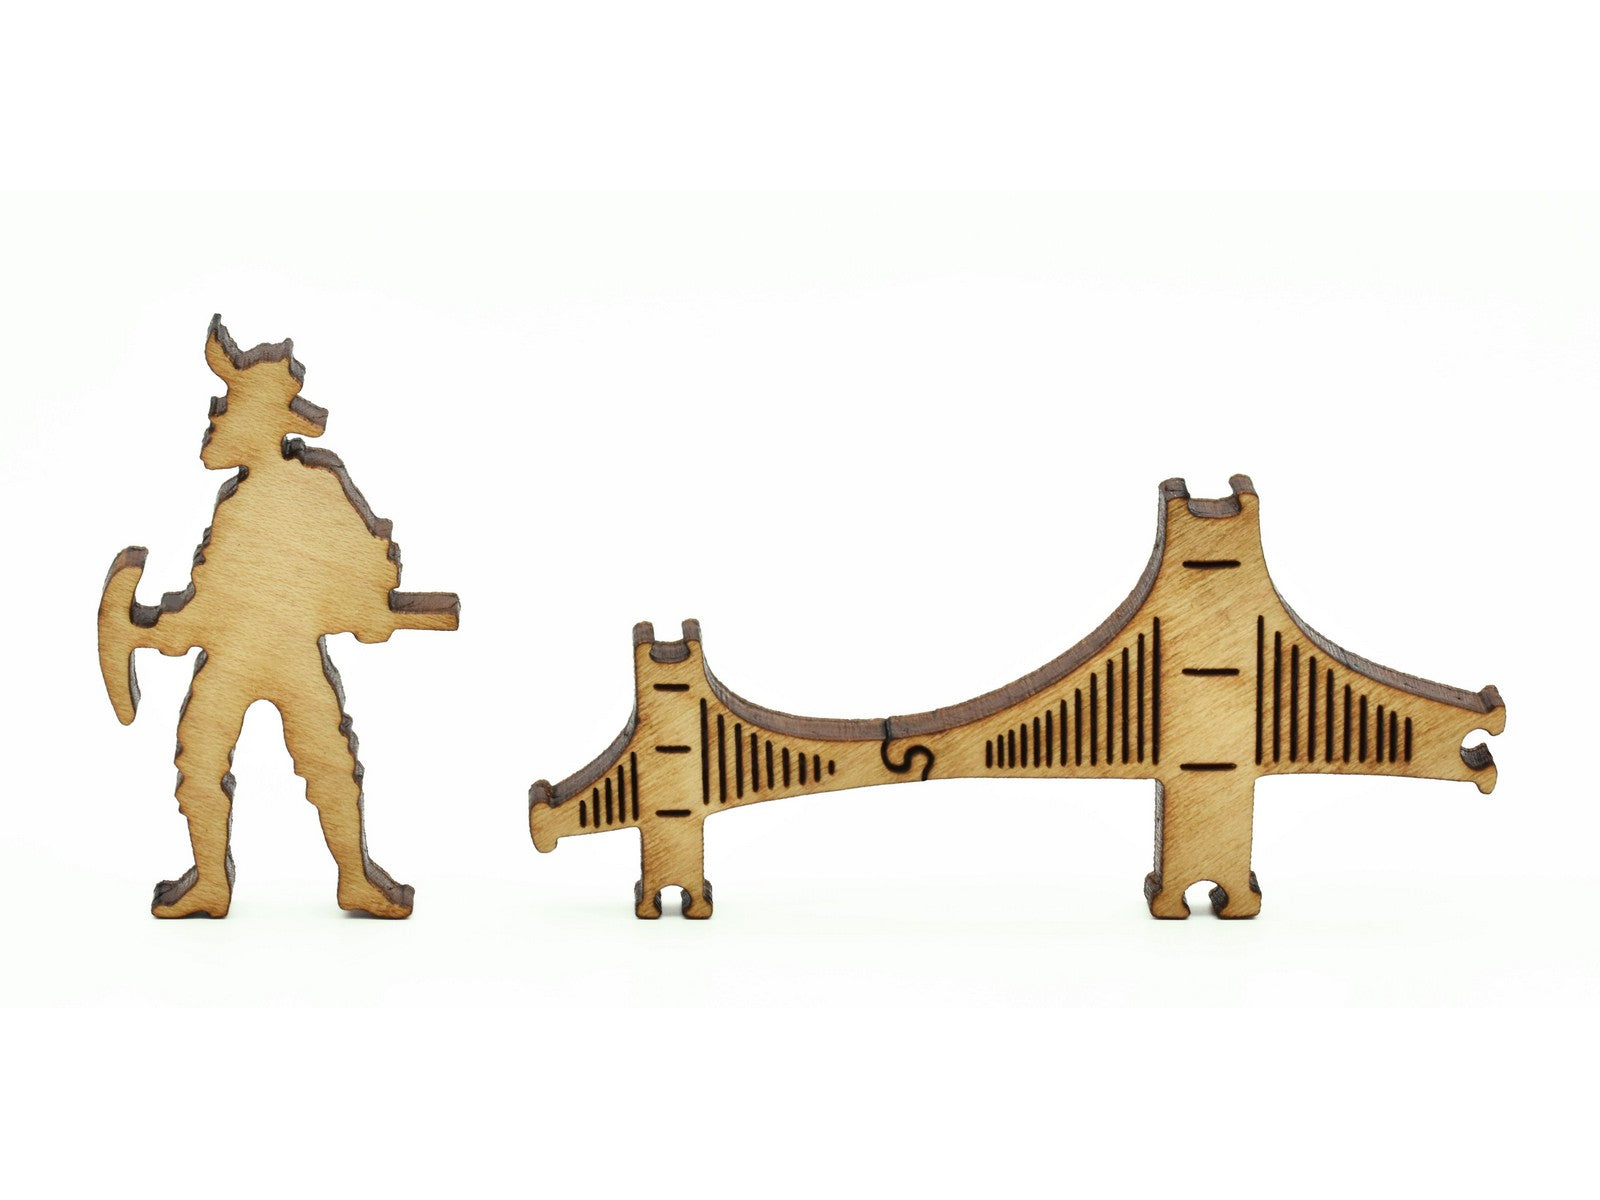 A closeup of pieces in the shape of a miner and the golden gate bridge.